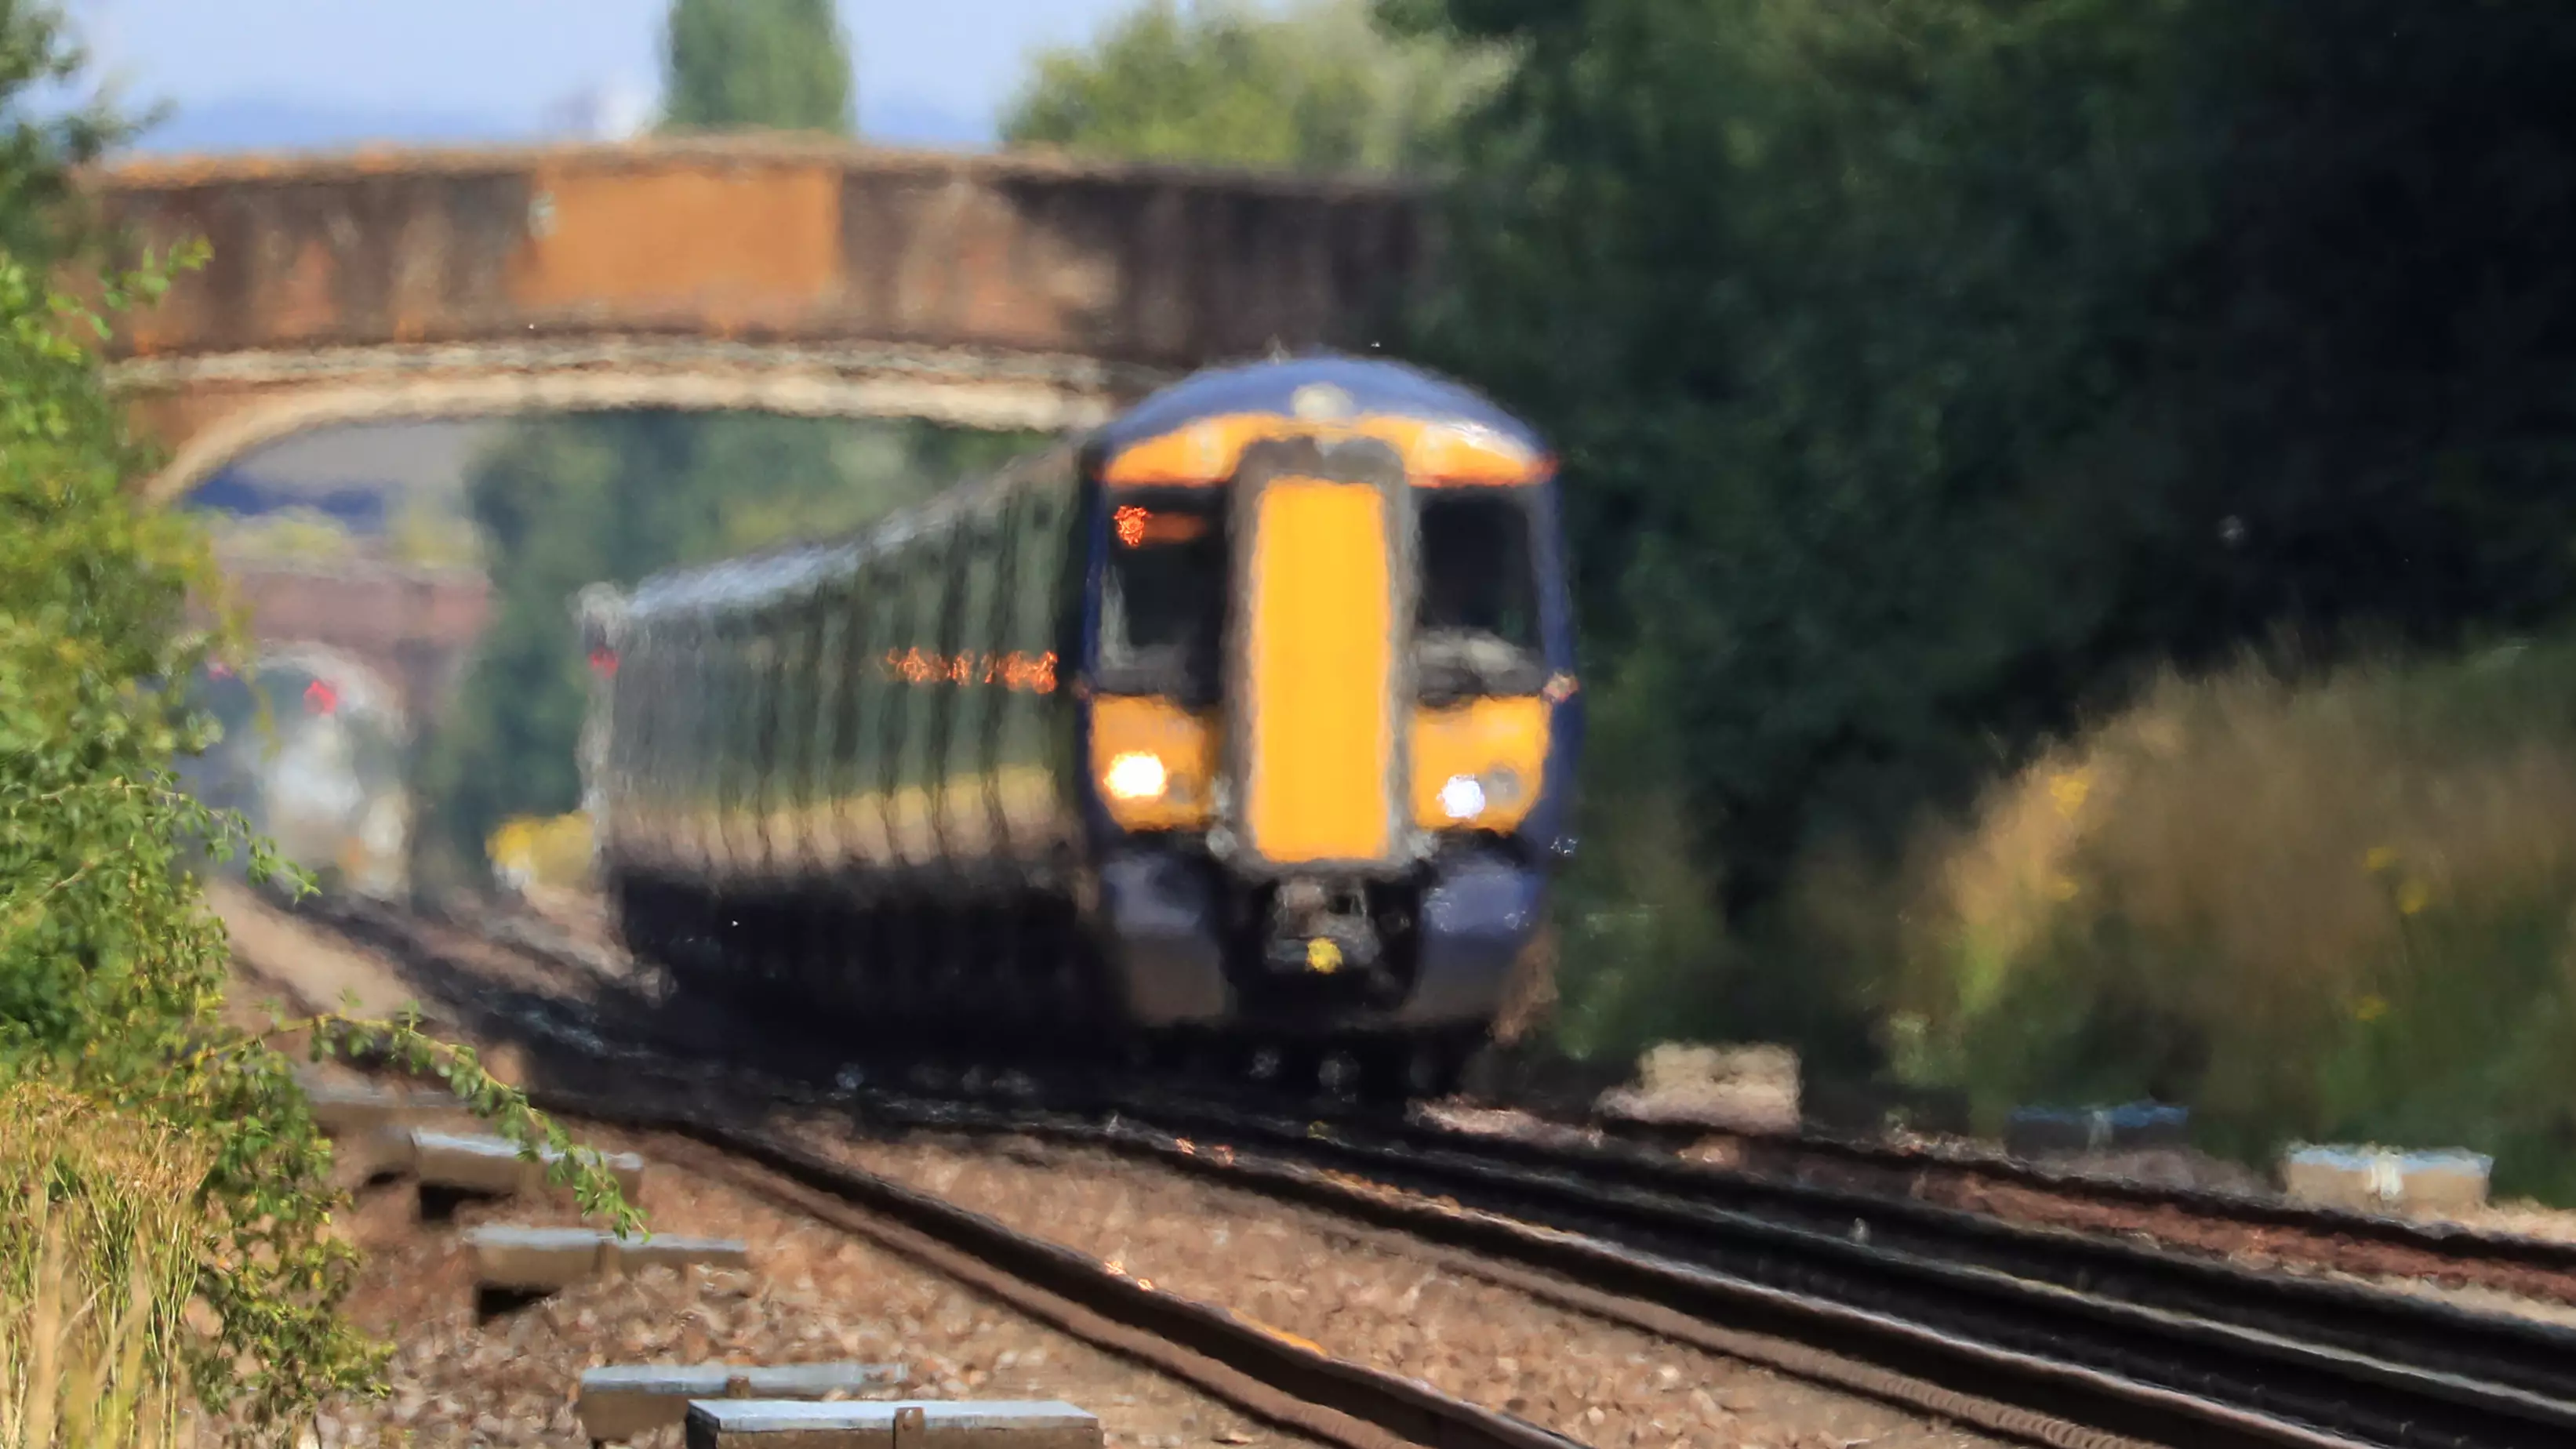 Get A 16-25 Railcard For Half Price And Save 1/3 On Train Fares